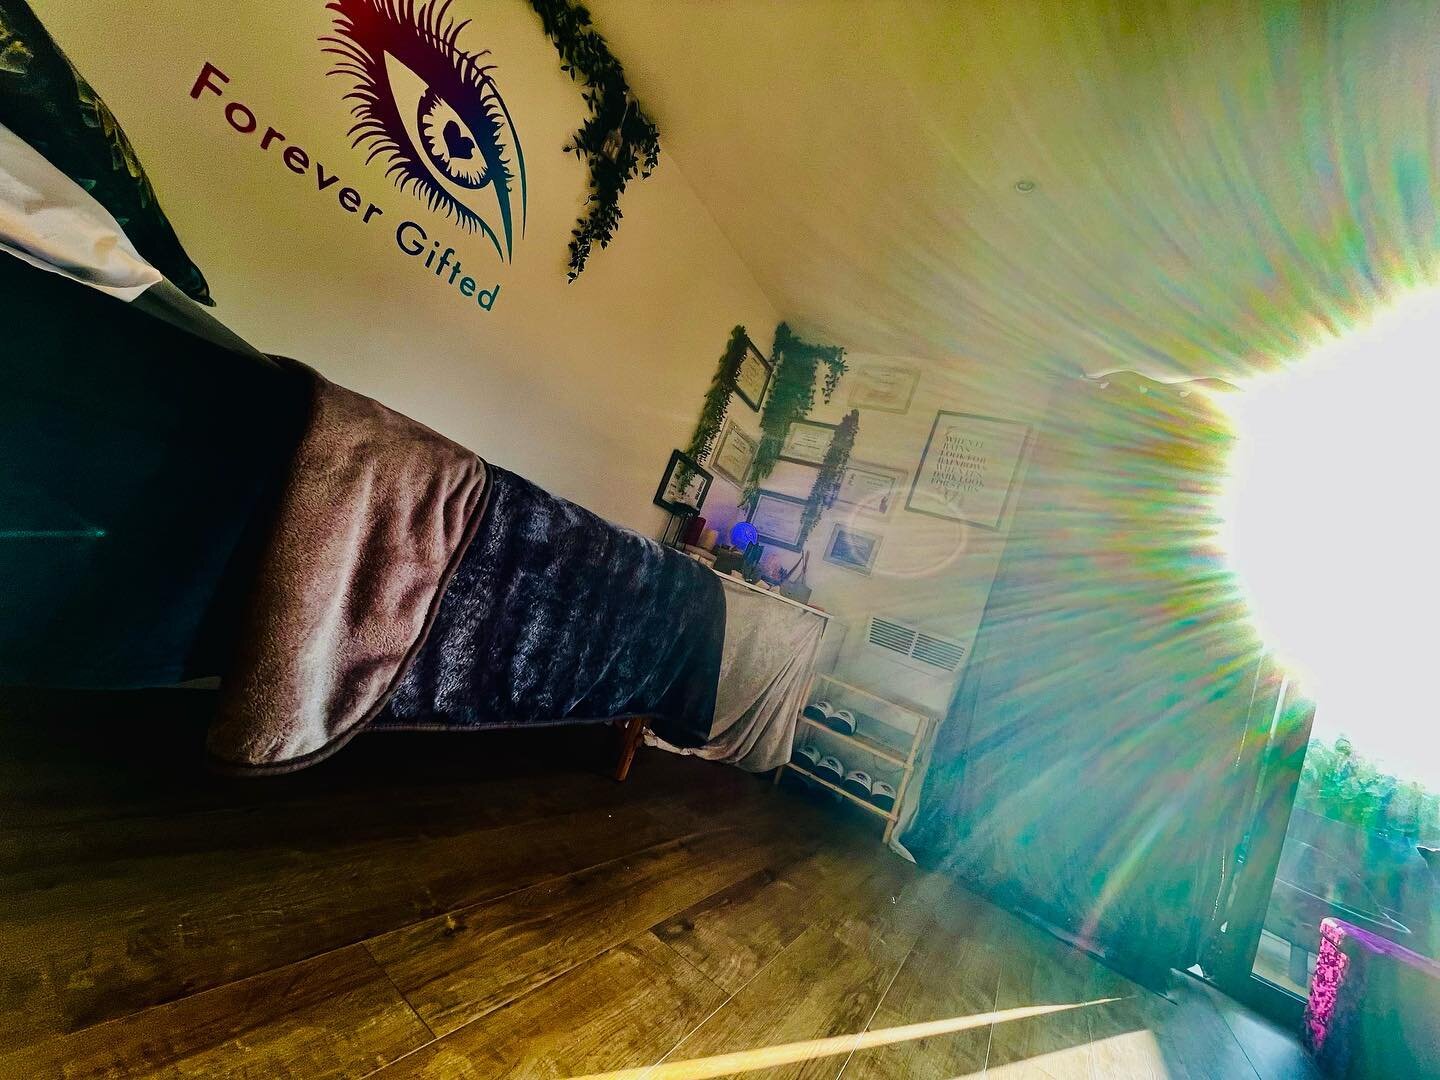 Beautiful energy flowing into the healing cabin in between my clients yesterday ☀️ 💡 💗

Hope you all have a magical day🙏🏽

😘Filiz💗

#forevergifted #healing #energy #lightcodes #sun #orb #energyhealing #spirit #nature #thelight #reiki #soundheal